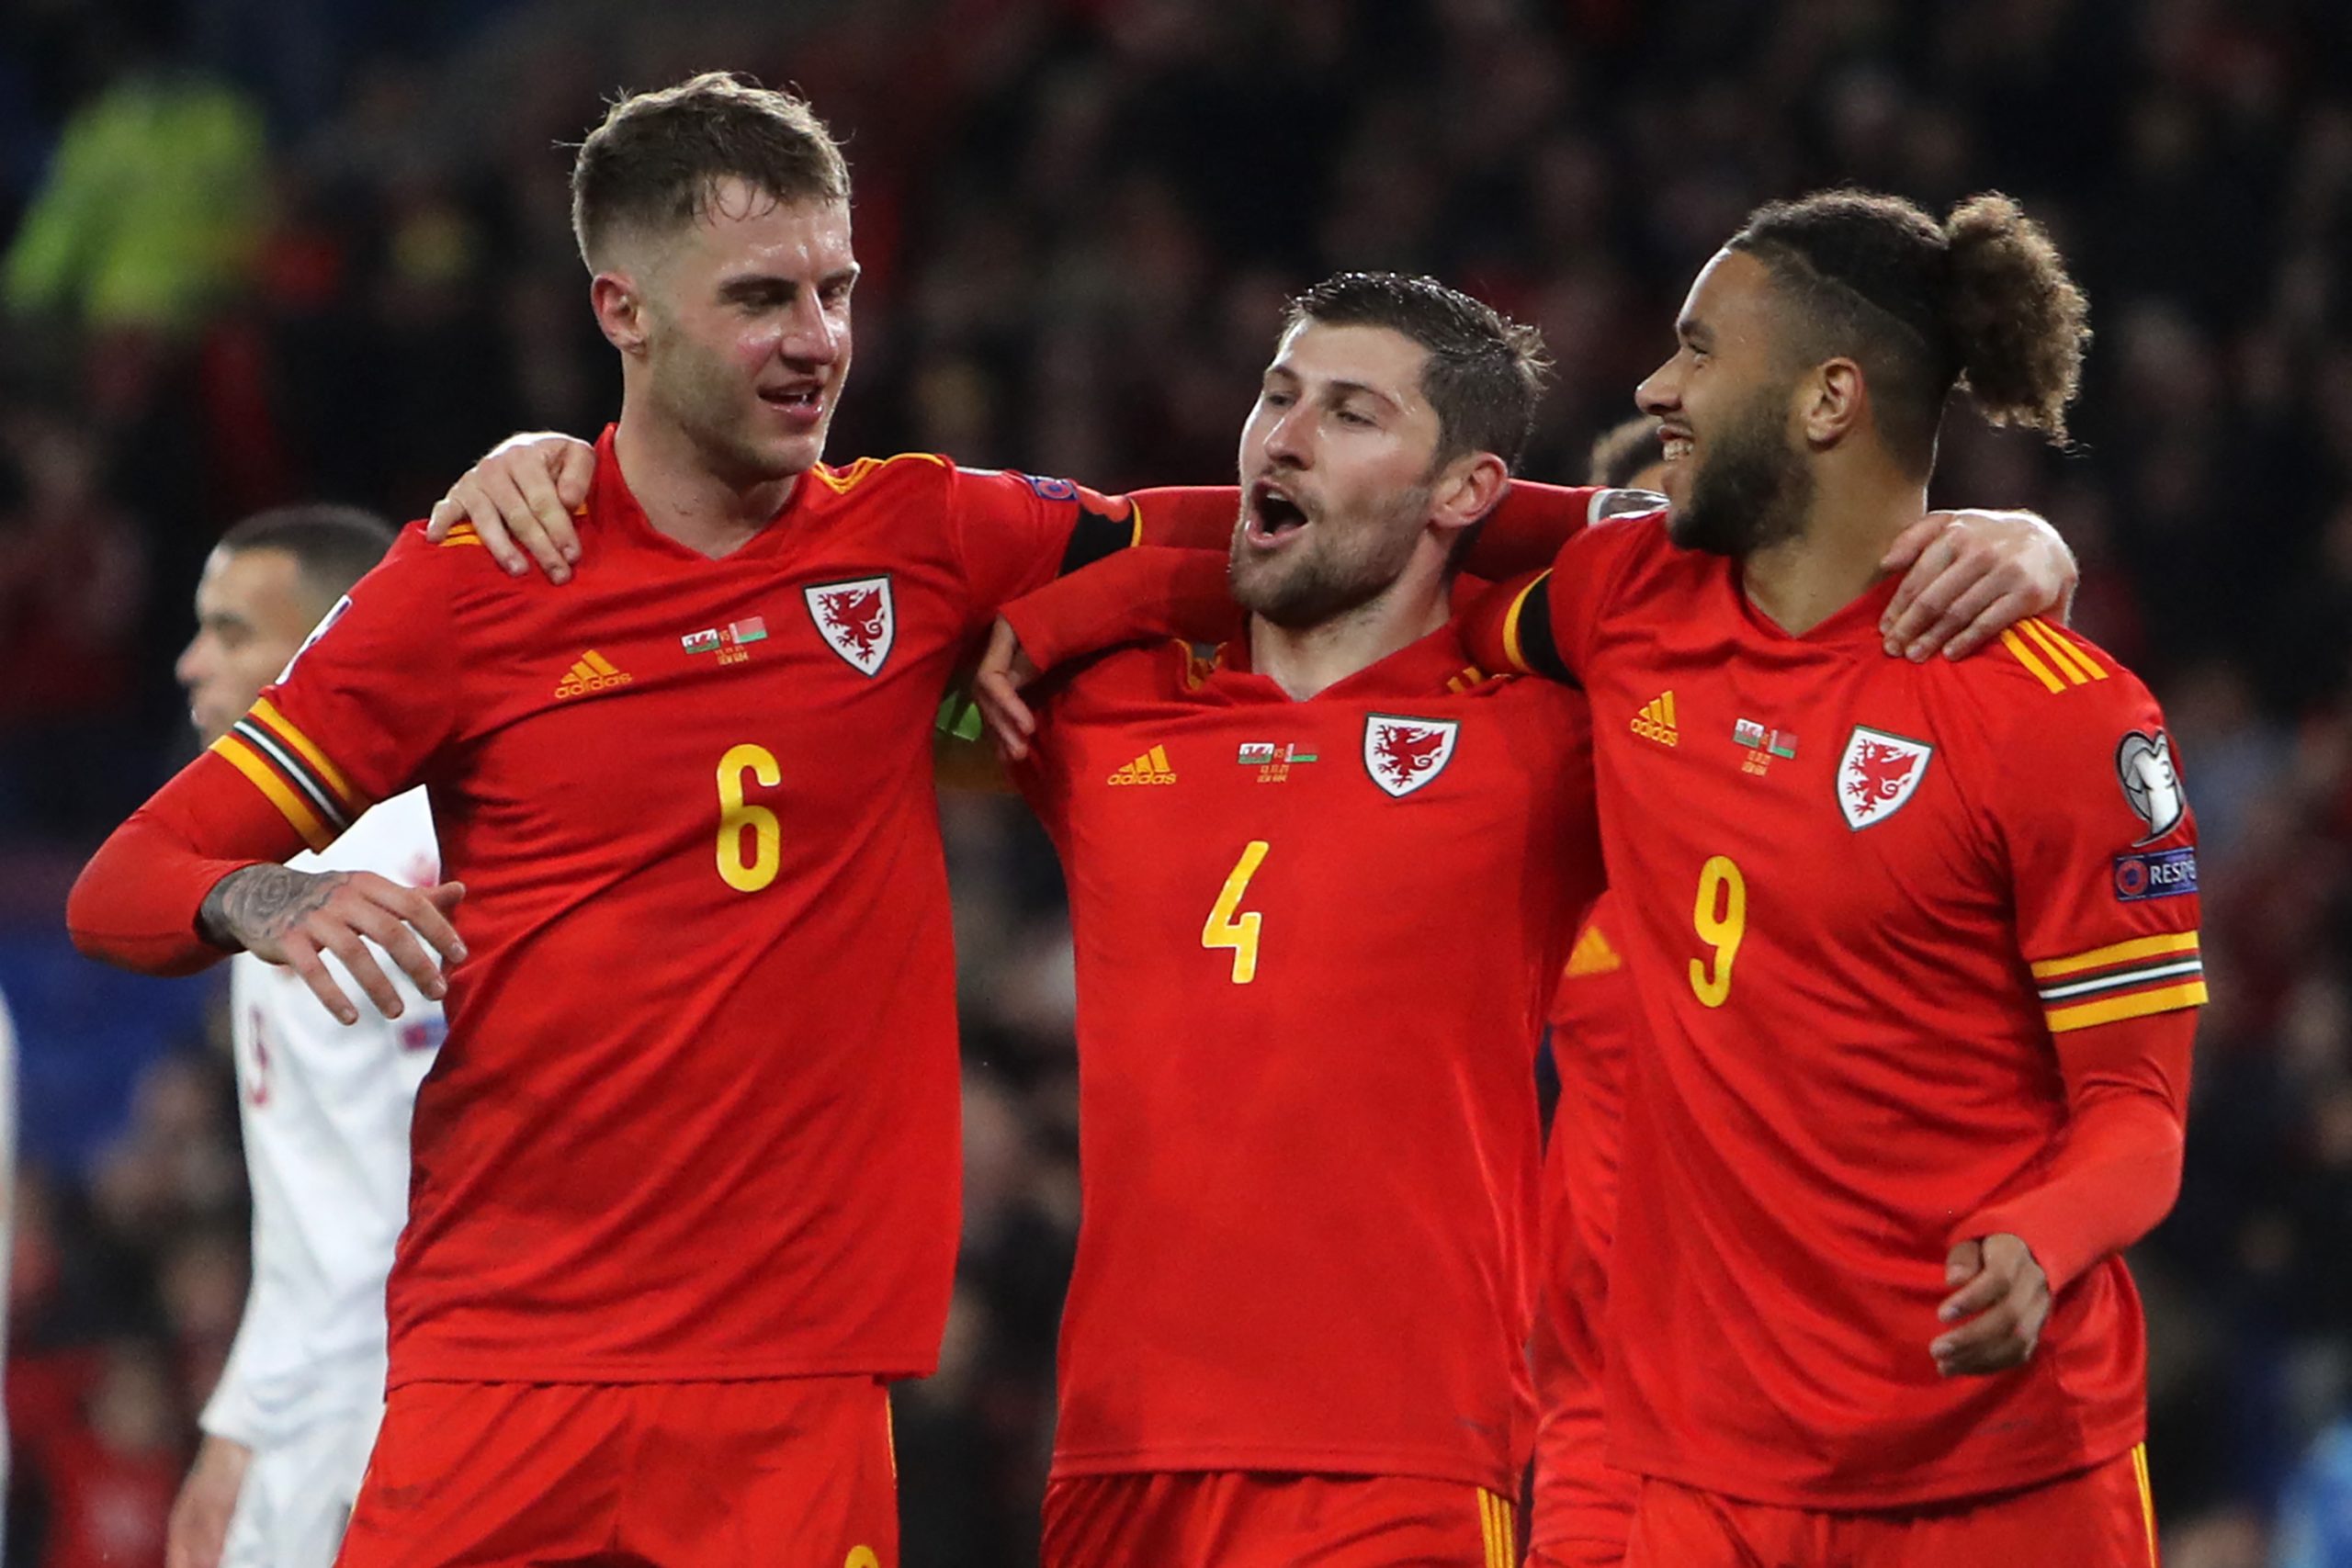 Wales' defender Ben Davies (C) celebrates with Joe Rodon and Tyler Roberts. (Photo by GEOFF CADDICK/AFP via Getty Images)